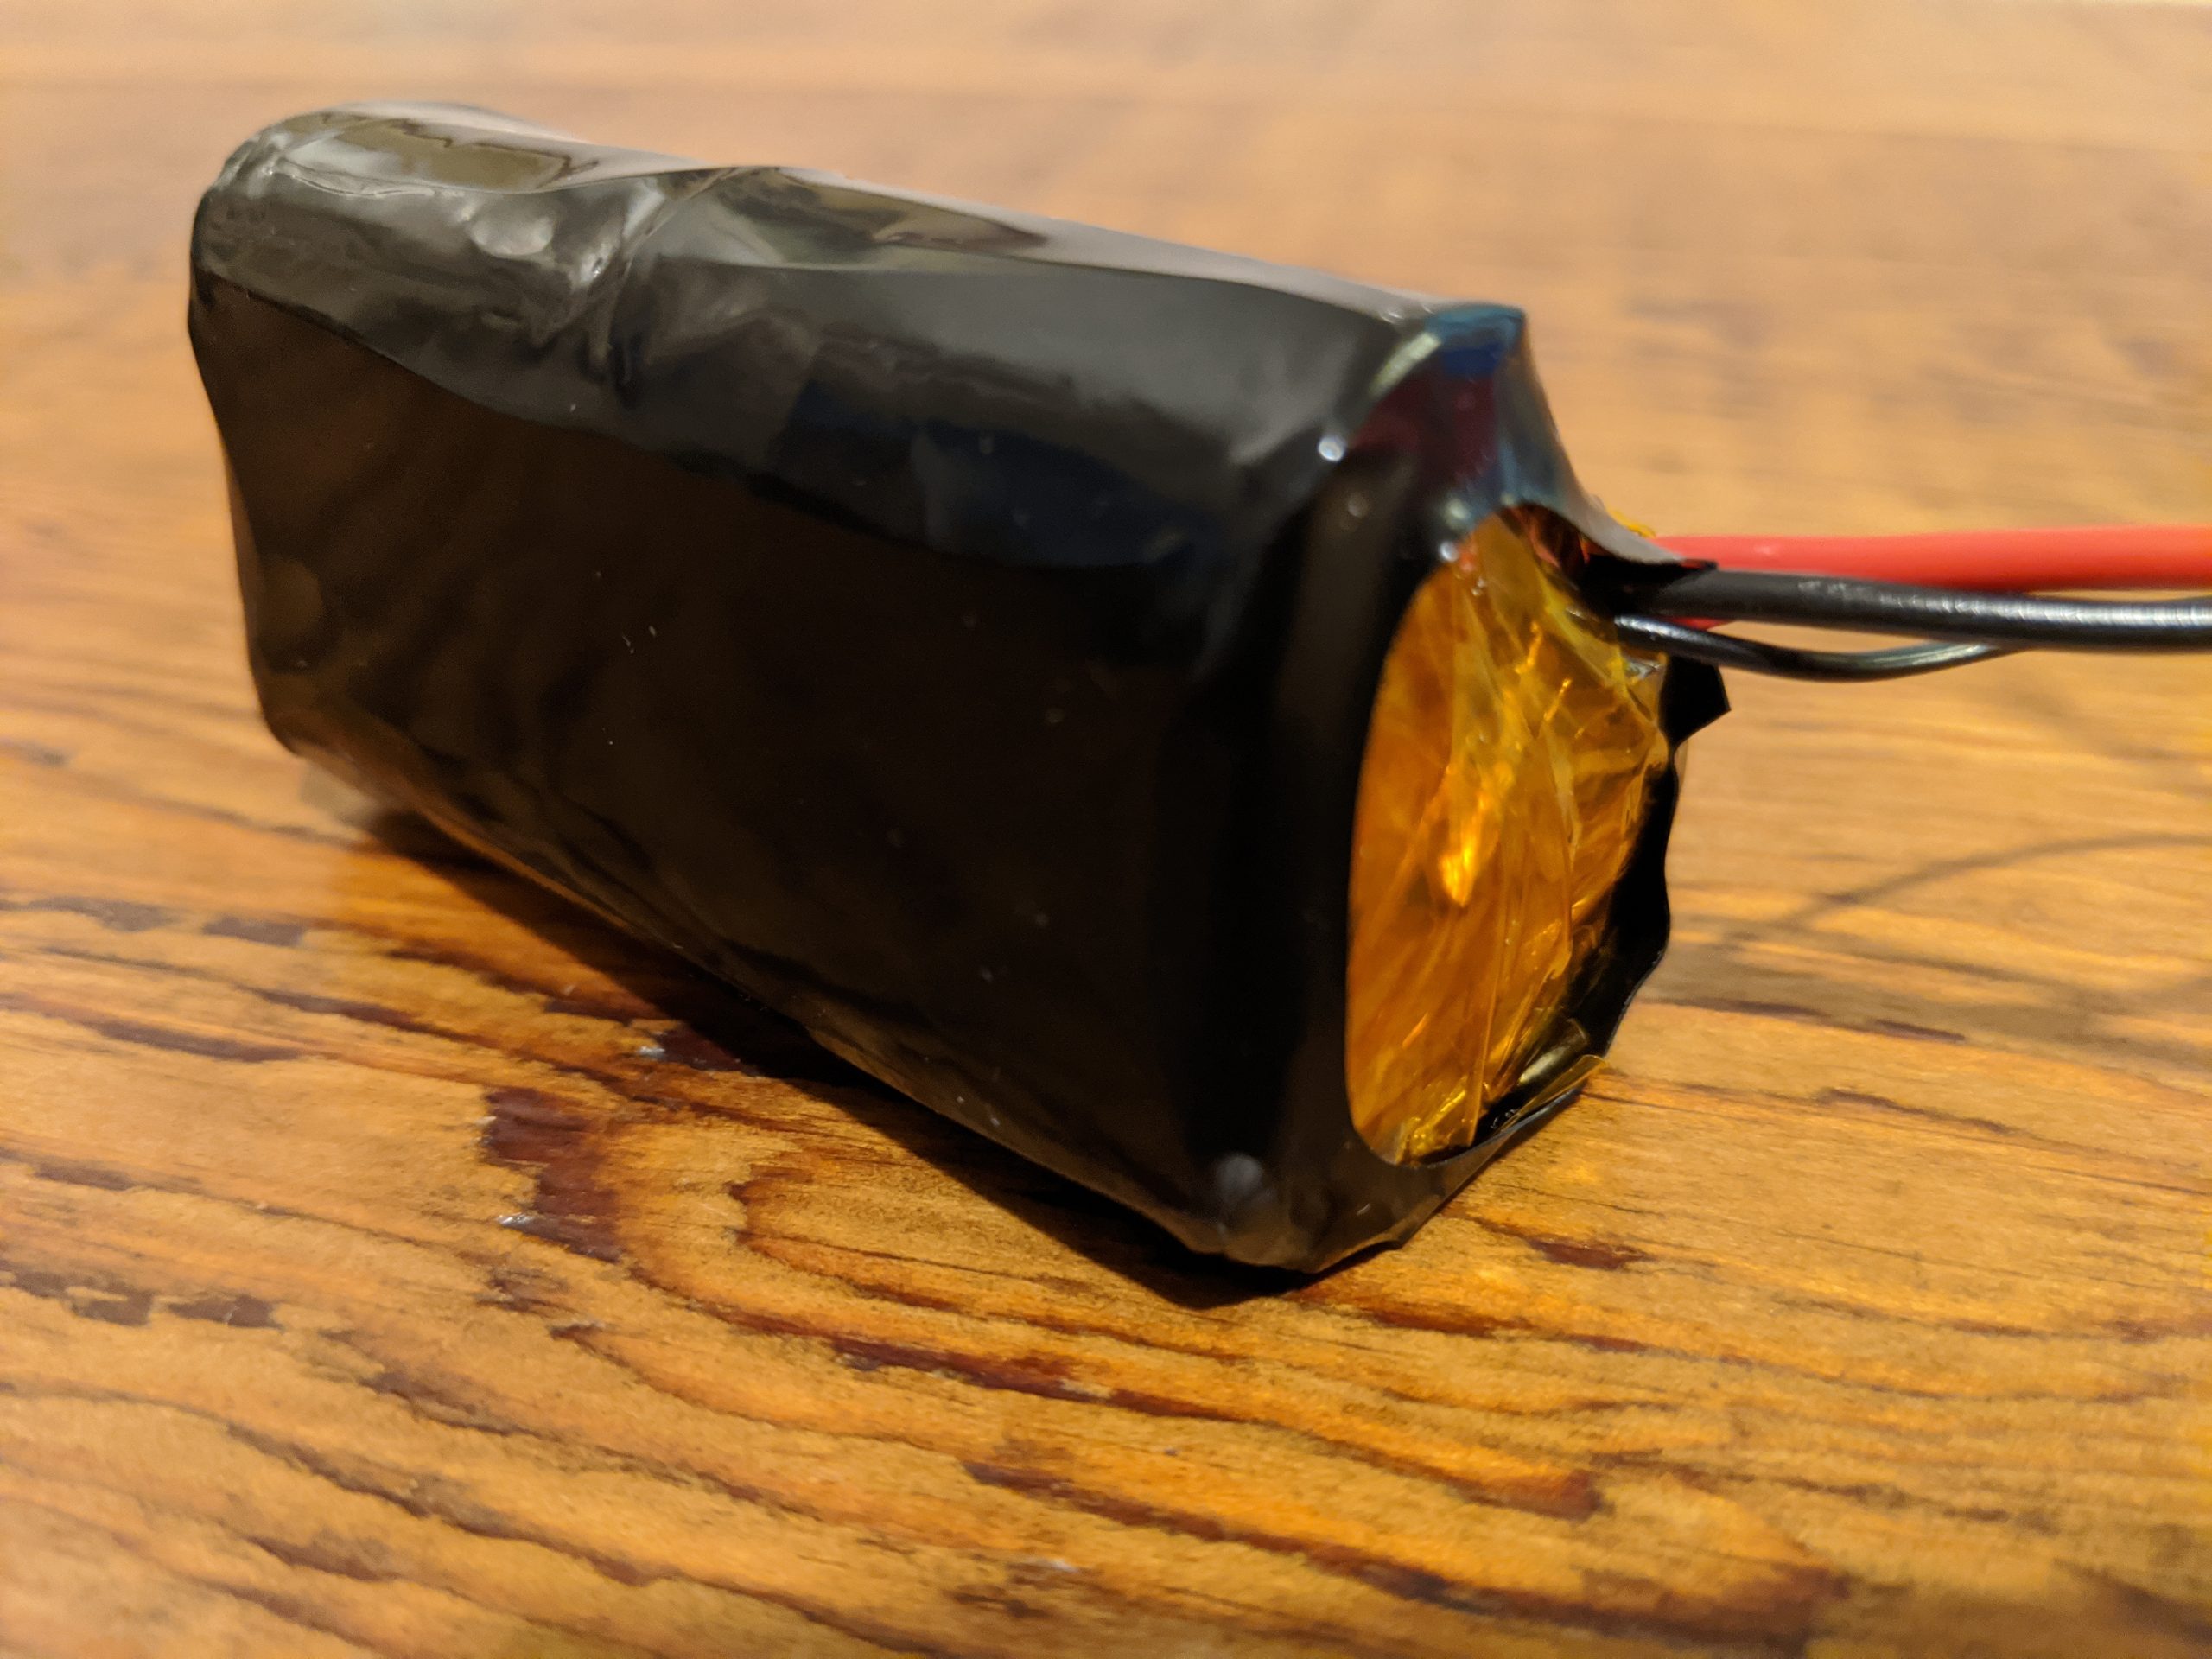 A finished battery, encased in kapton tape and shrink wrap